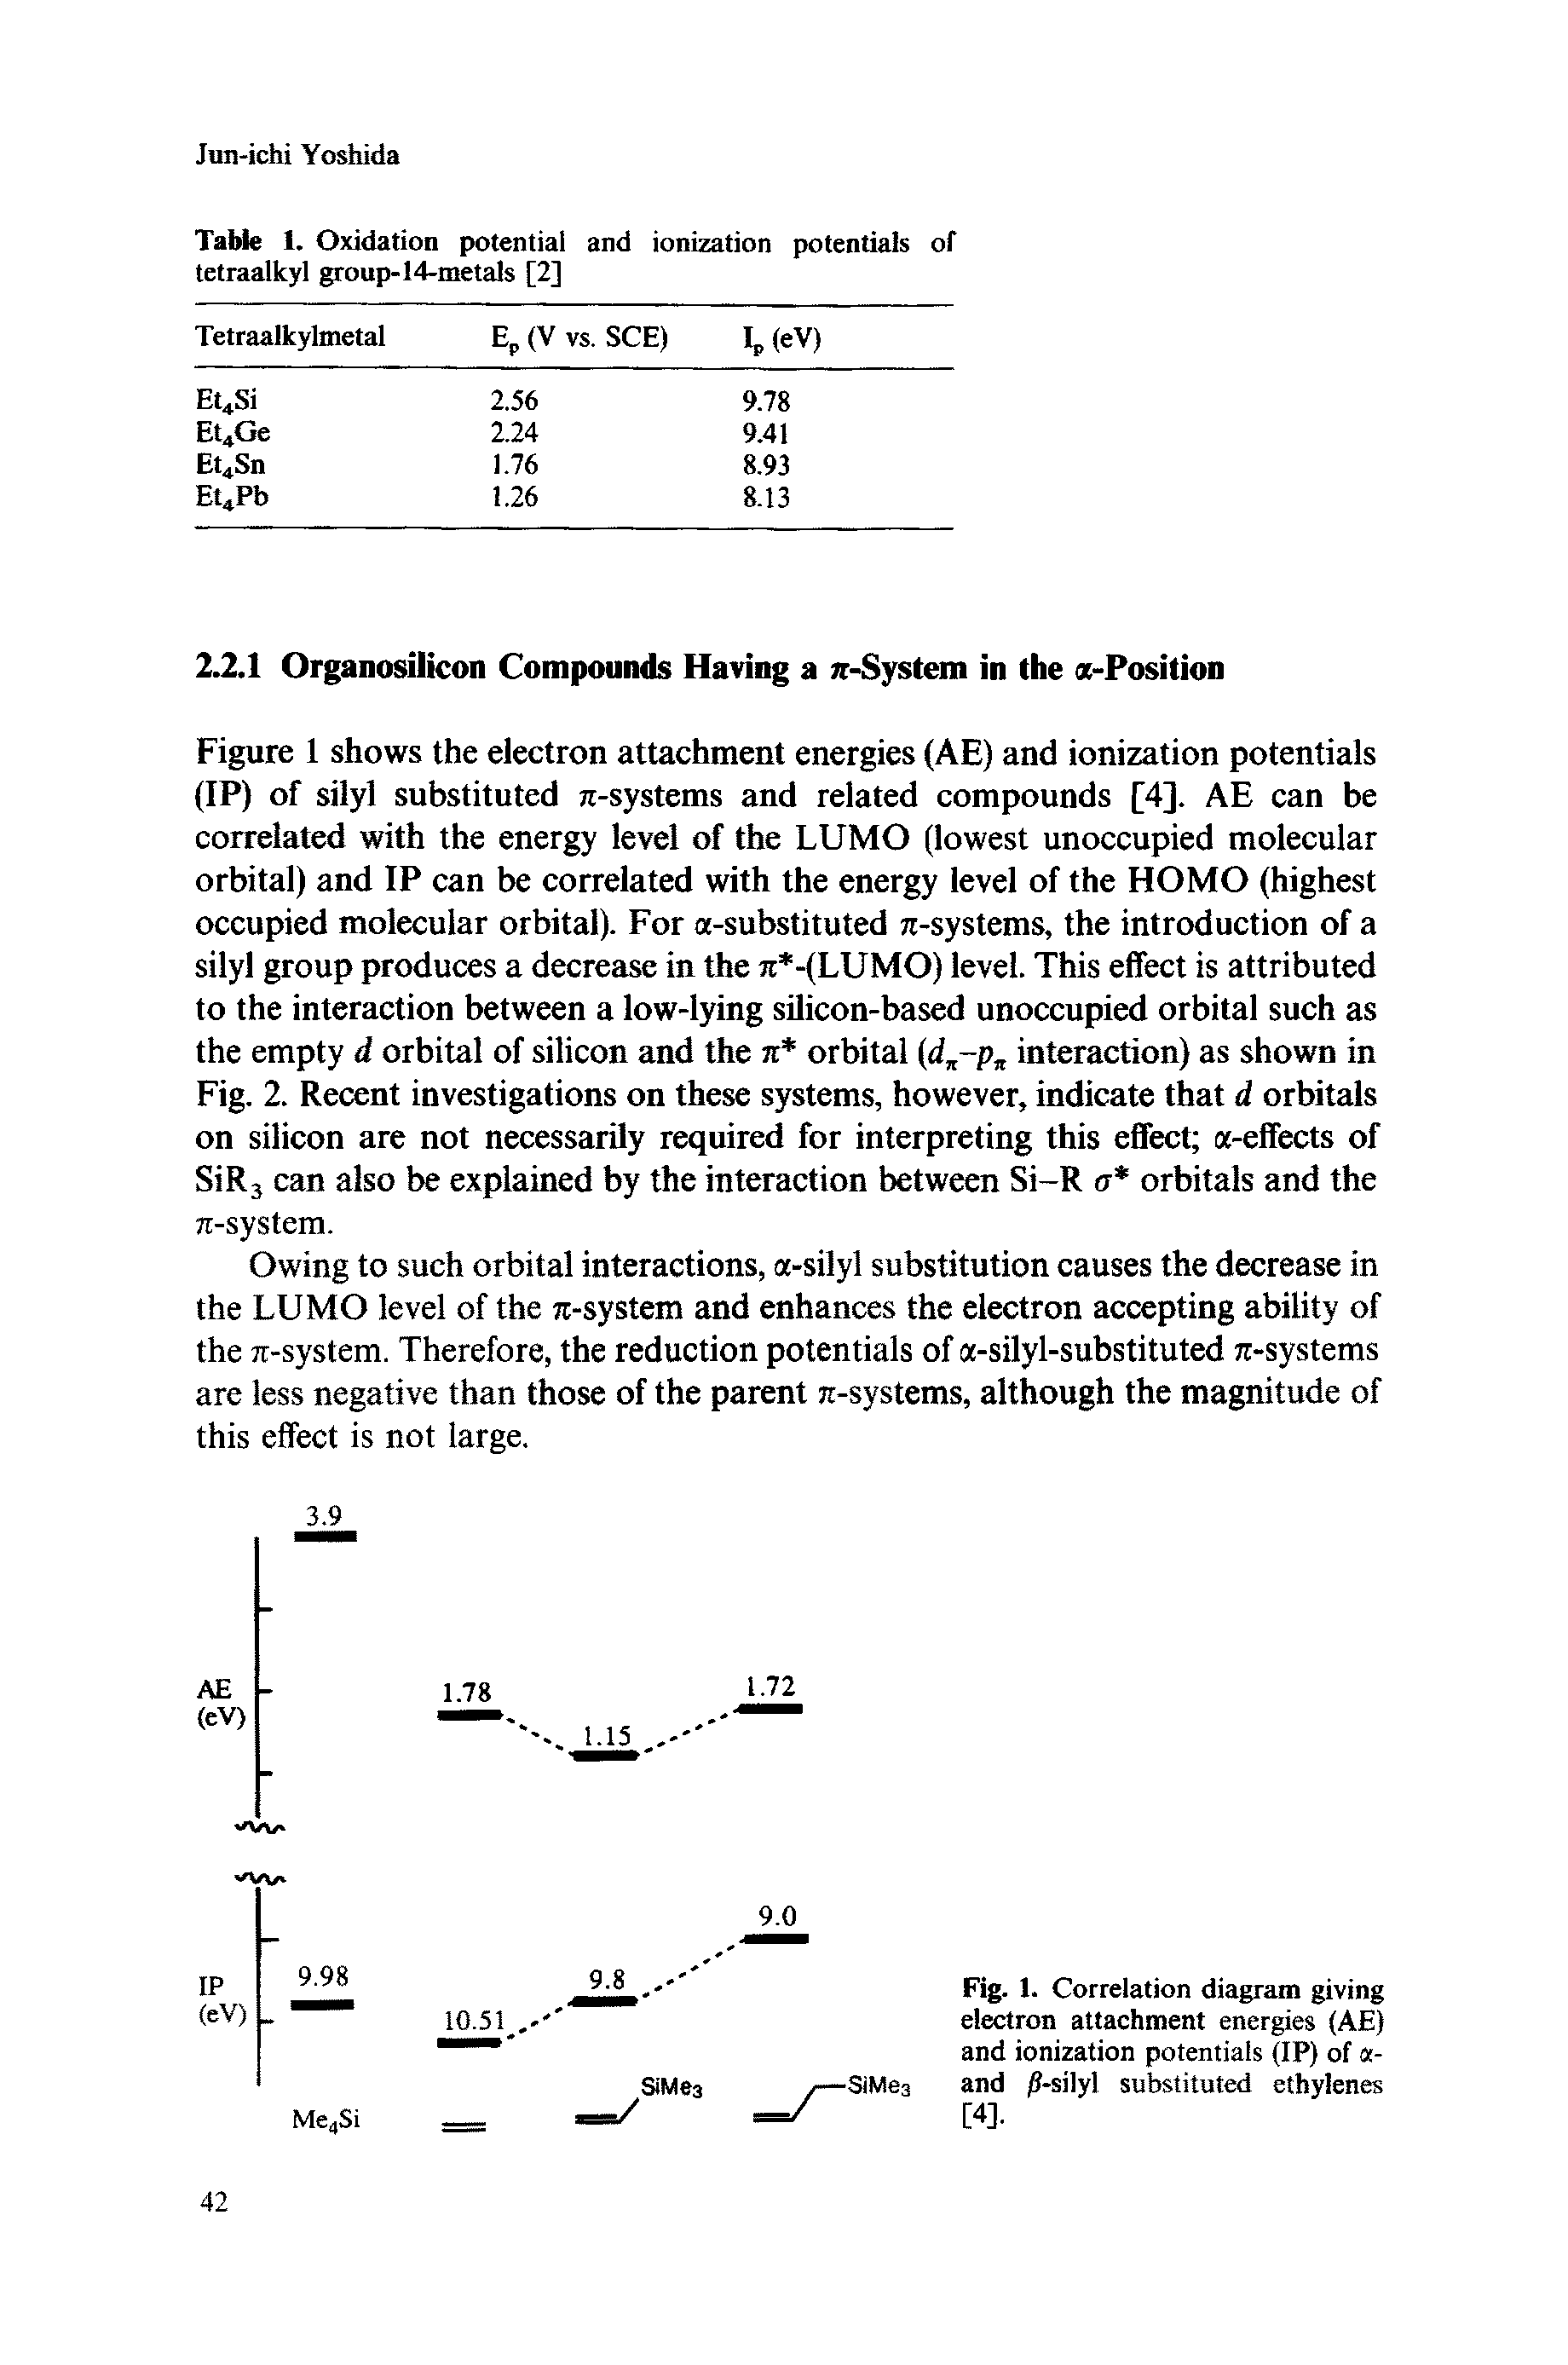 Figure 1 shows the electron attachment energies (AE) and ionization potentials (IP) of silyl substituted 7t-systems and related compounds [4], AE can be correlated with the energy level of the LUMO (lowest unoccupied molecular orbital) and IP can be correlated with the energy level of the HOMO (highest occupied molecular orbital). For a-substituted 7t-systems, the introduction of a silyl group produces a decrease in the tc -(LUMO) level. This effect is attributed to the interaction between a low-lying silicon-based unoccupied orbital such as the empty d orbital of silicon and the it orbital (d -p interaction) as shown in Fig. 2. Recent investigations on these systems, however, indicate that d orbitals on silicon are not necessarily required for interpreting this effect a-effects of SiR3 can also be explained by the interaction between Si-R a orbitals and the 7r-system.